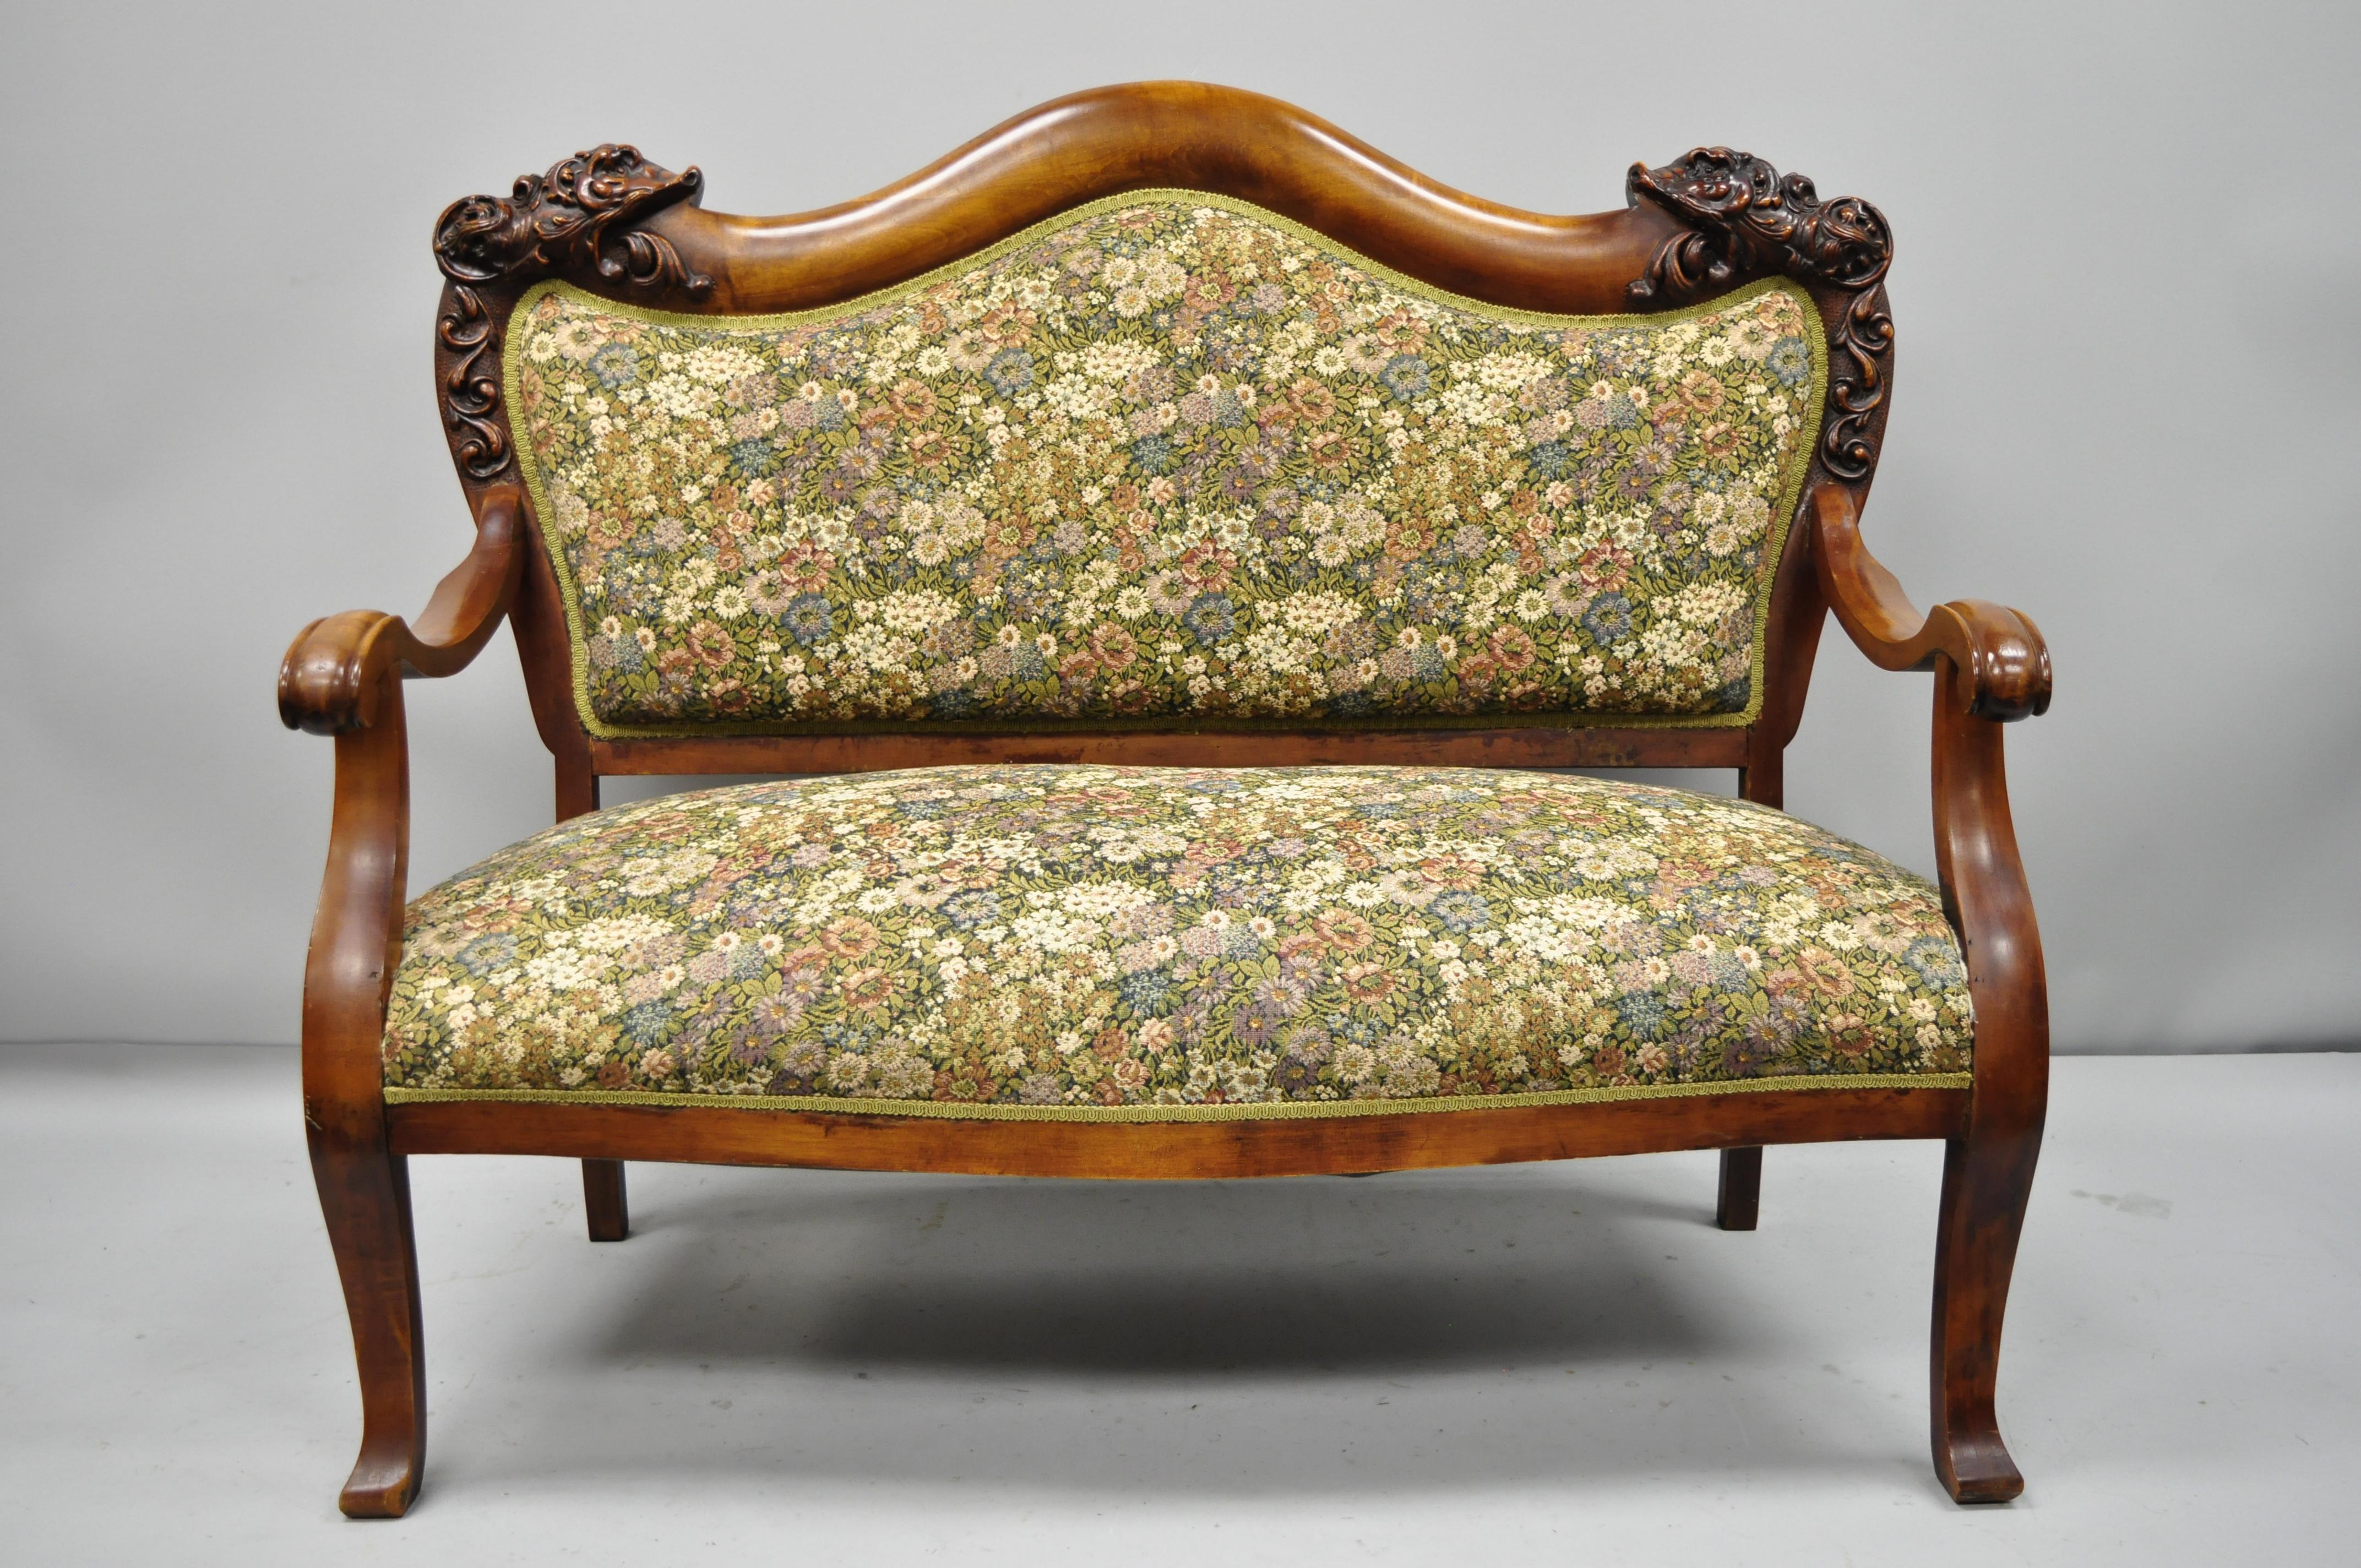 3 piece Victorian Empire mahogany dolphin carved parlor set. Set includes, loveseat, armchair, side chair, open mouth gesso dolphins, floral fabric, beautiful wood grain, and great style and form, circa late 19th century. Measurements: Sofa 41.5